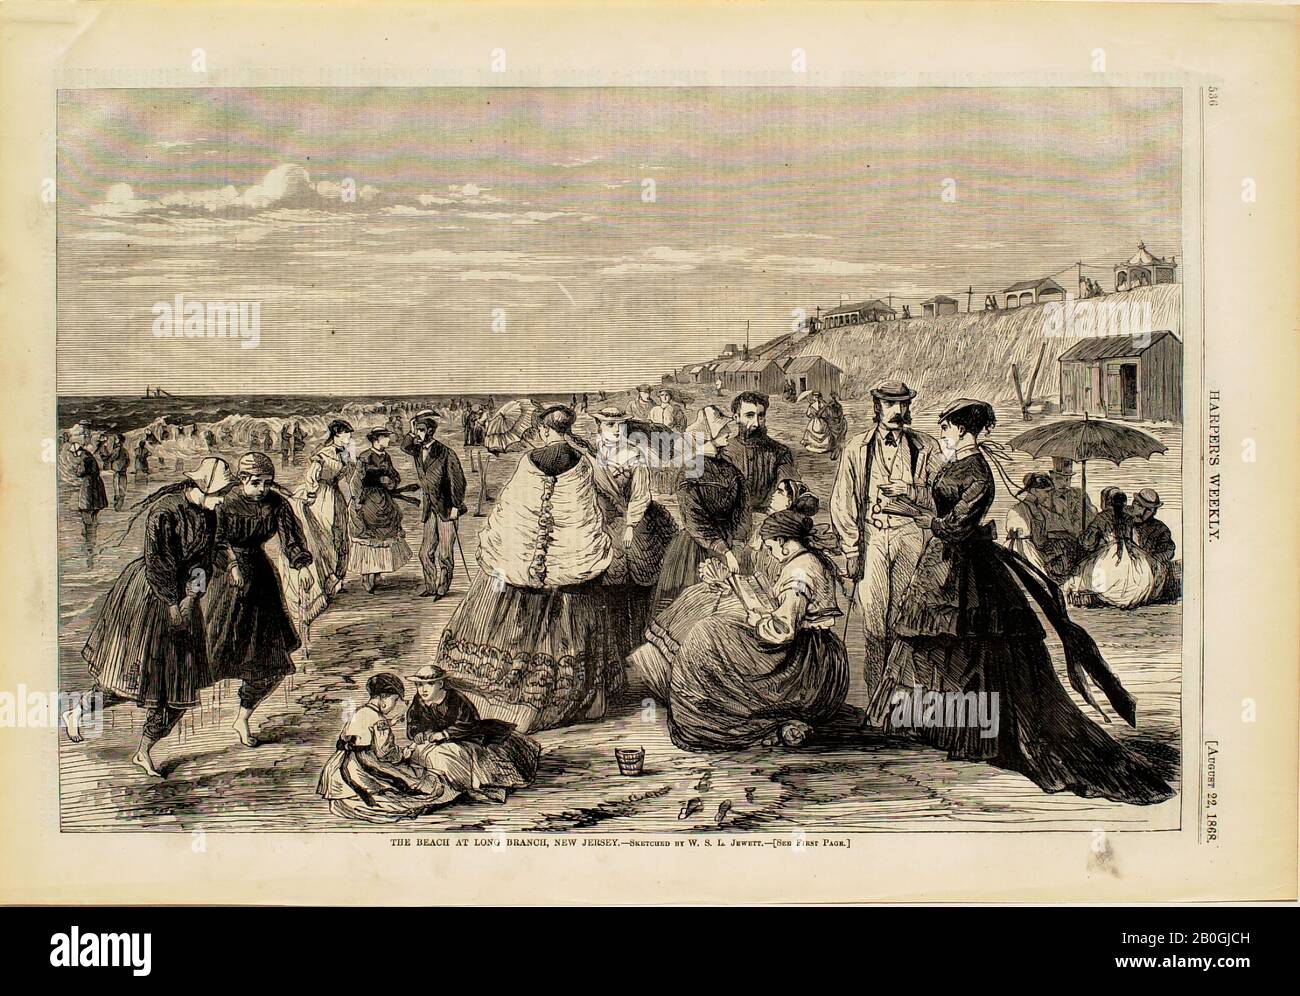 William Smith Jewett, American, 1812–1873, The Beach at Long Branch, New Jersey, From Harper's Weekly, 1868, Wood engraving on paper, image: 9 3/16 x 13 7/8 in. (23.3 x 35.3 cm Stock Photo